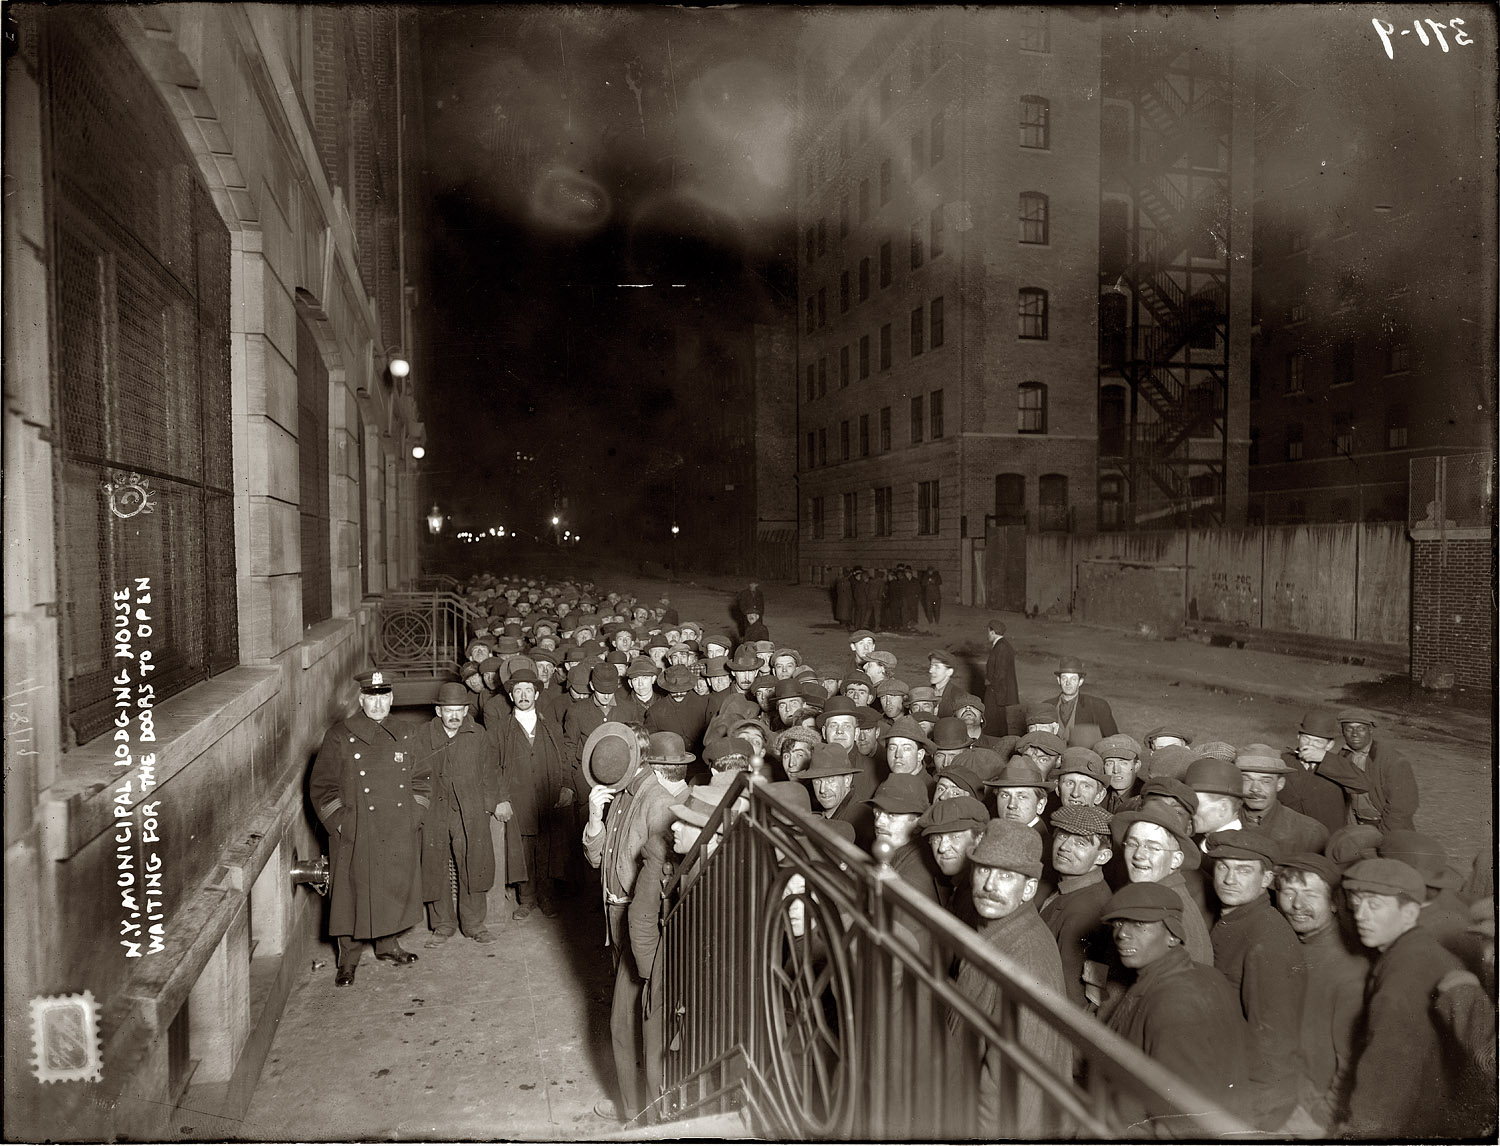 January 18, 1917. "New York Municipal Lodging House. Waiting for the doors to open." View full size. 8x10 glass negative, George Grantham Bain Collection.
